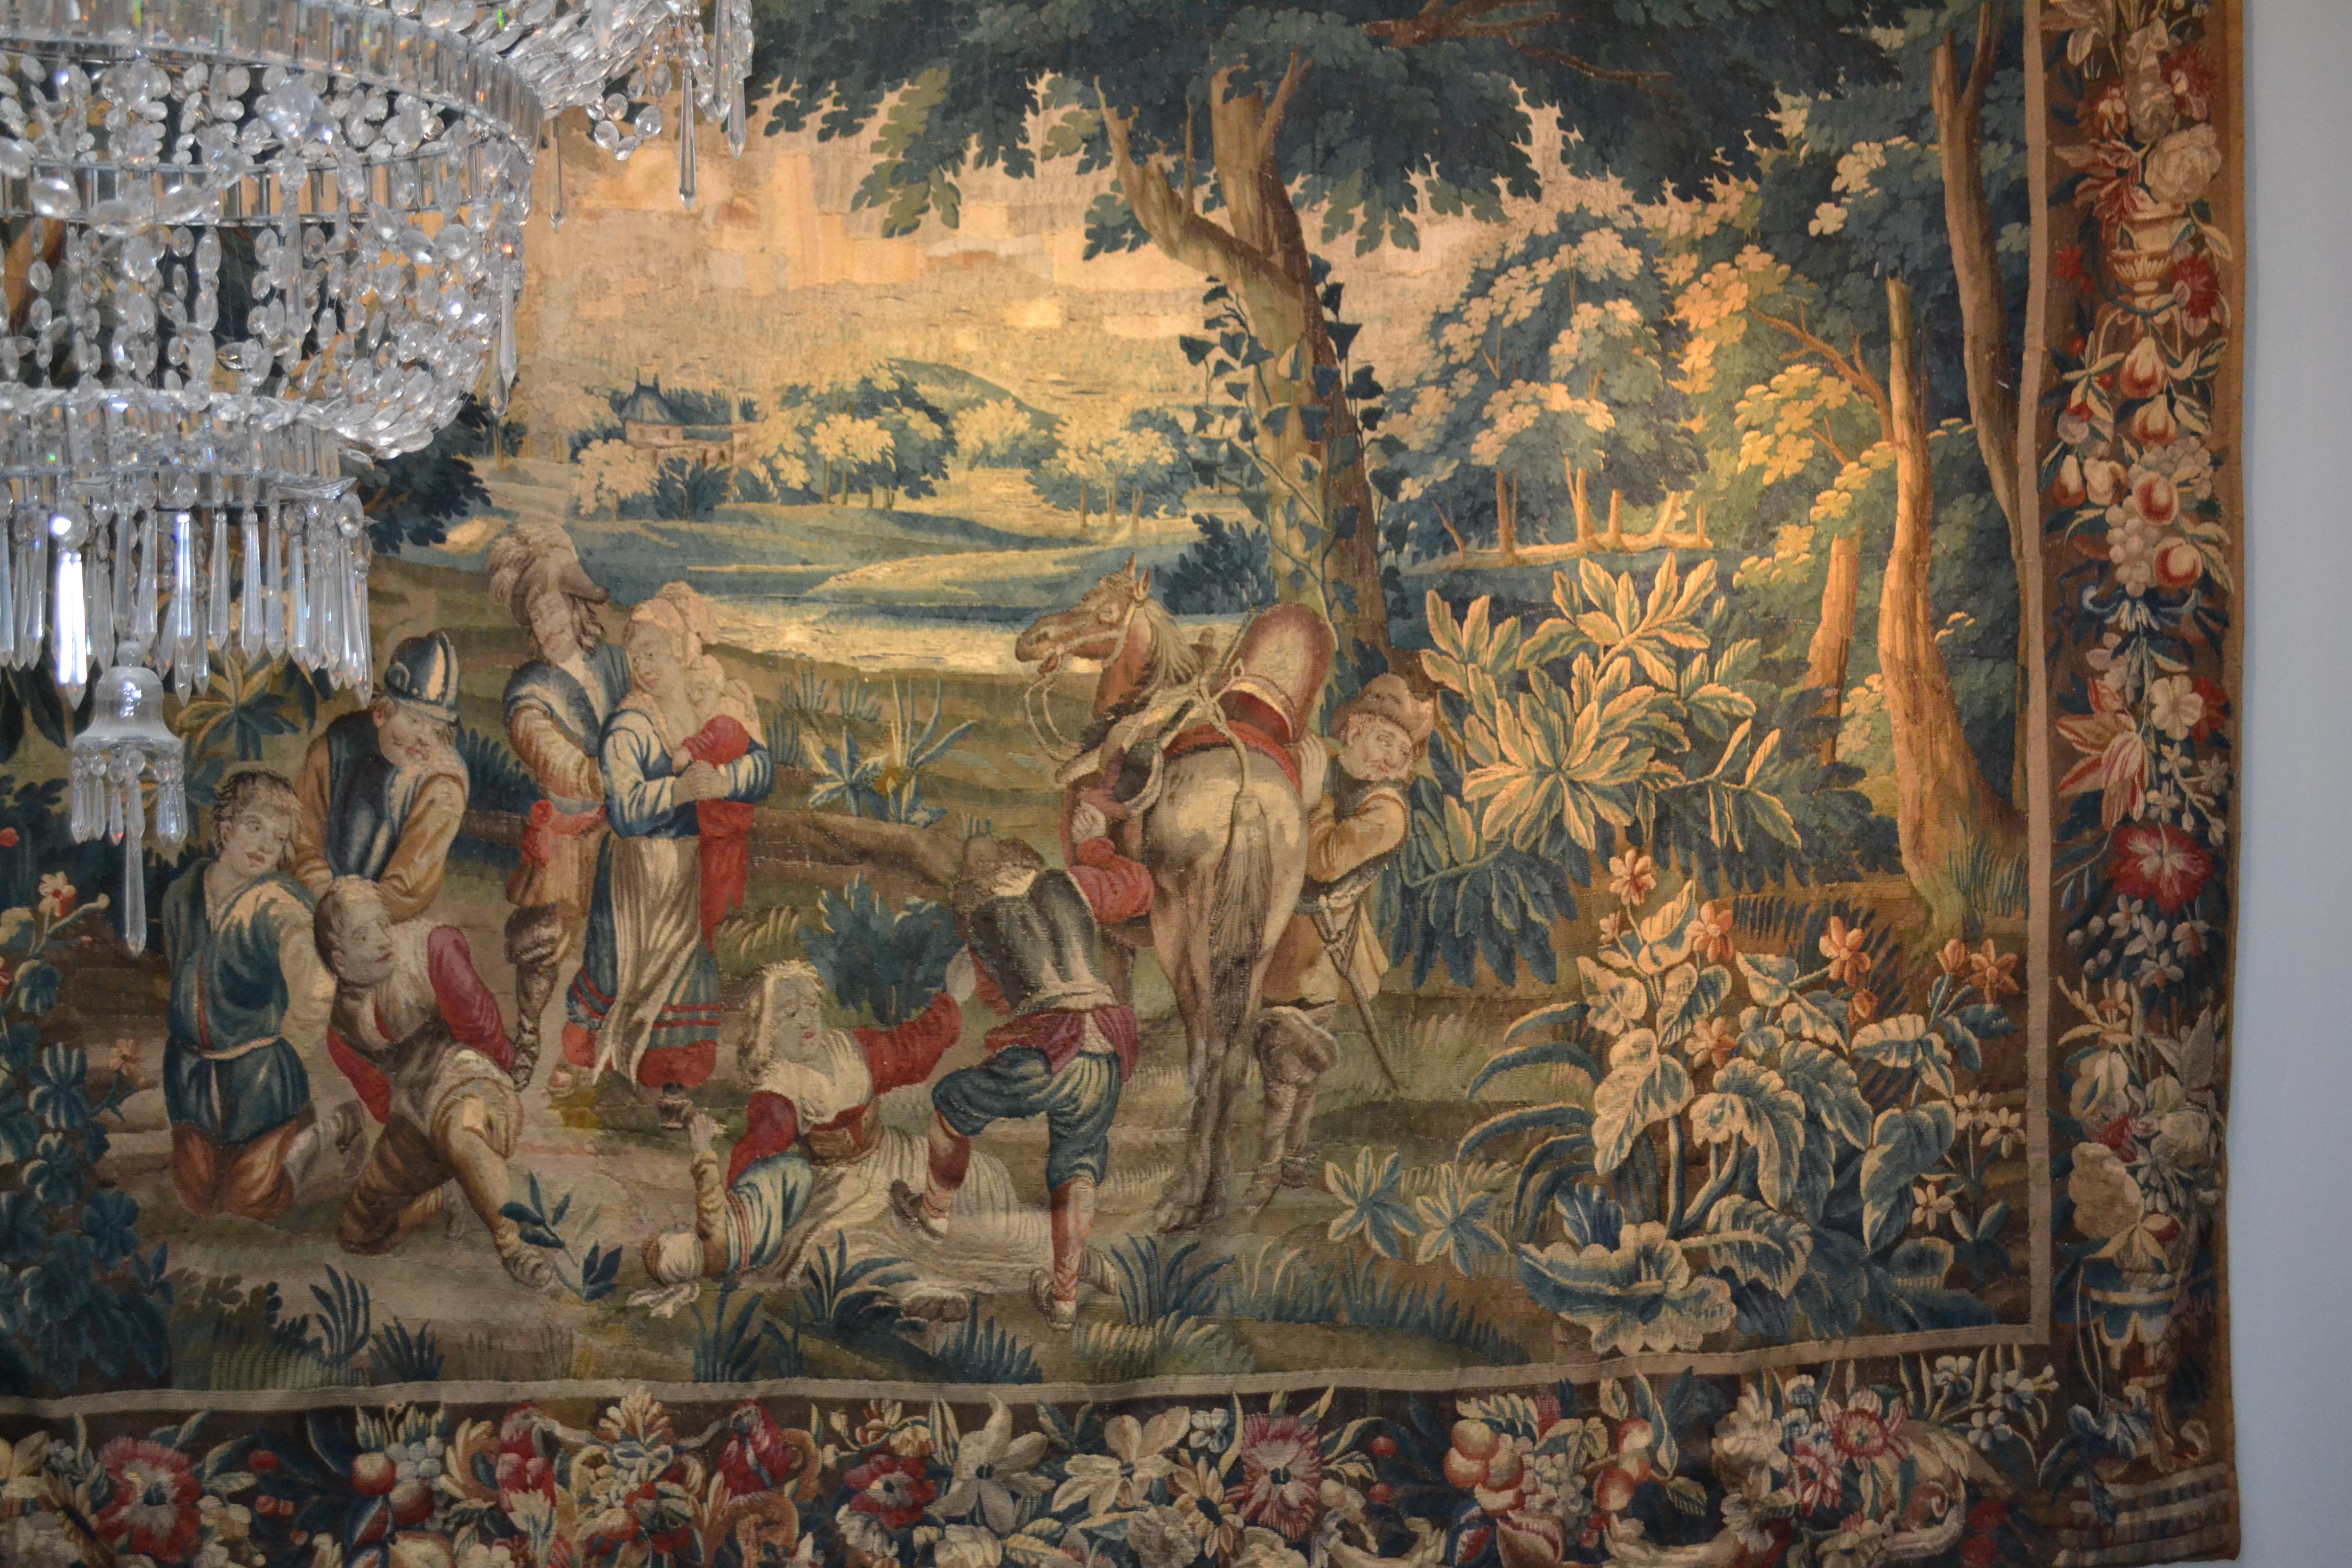 Wool 17th Century Flemish Tapestry from the Estate of Baron Munchausen